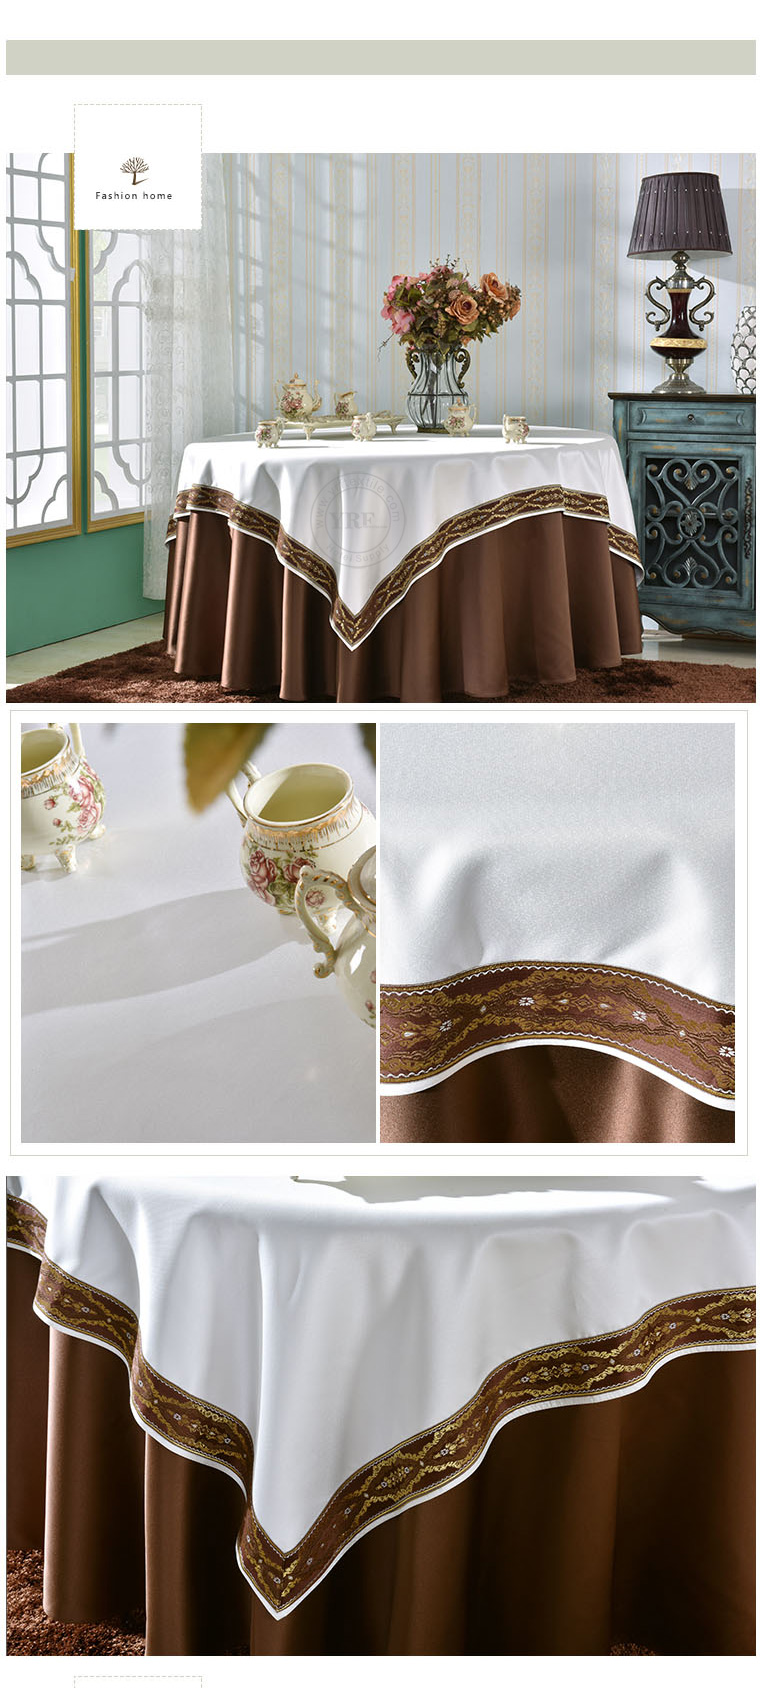 Embroidery Design Tablecloth